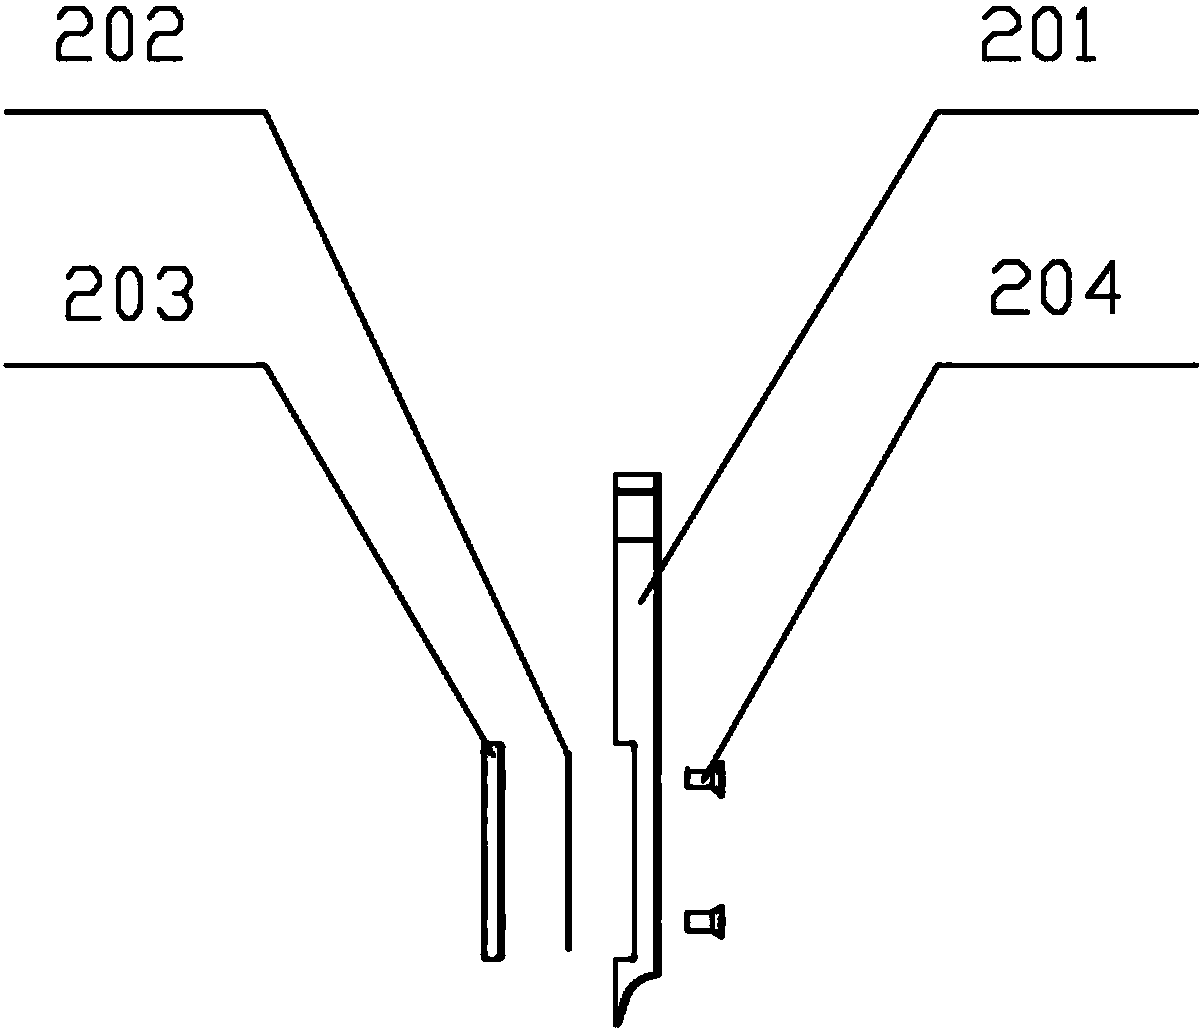 A device for deburring